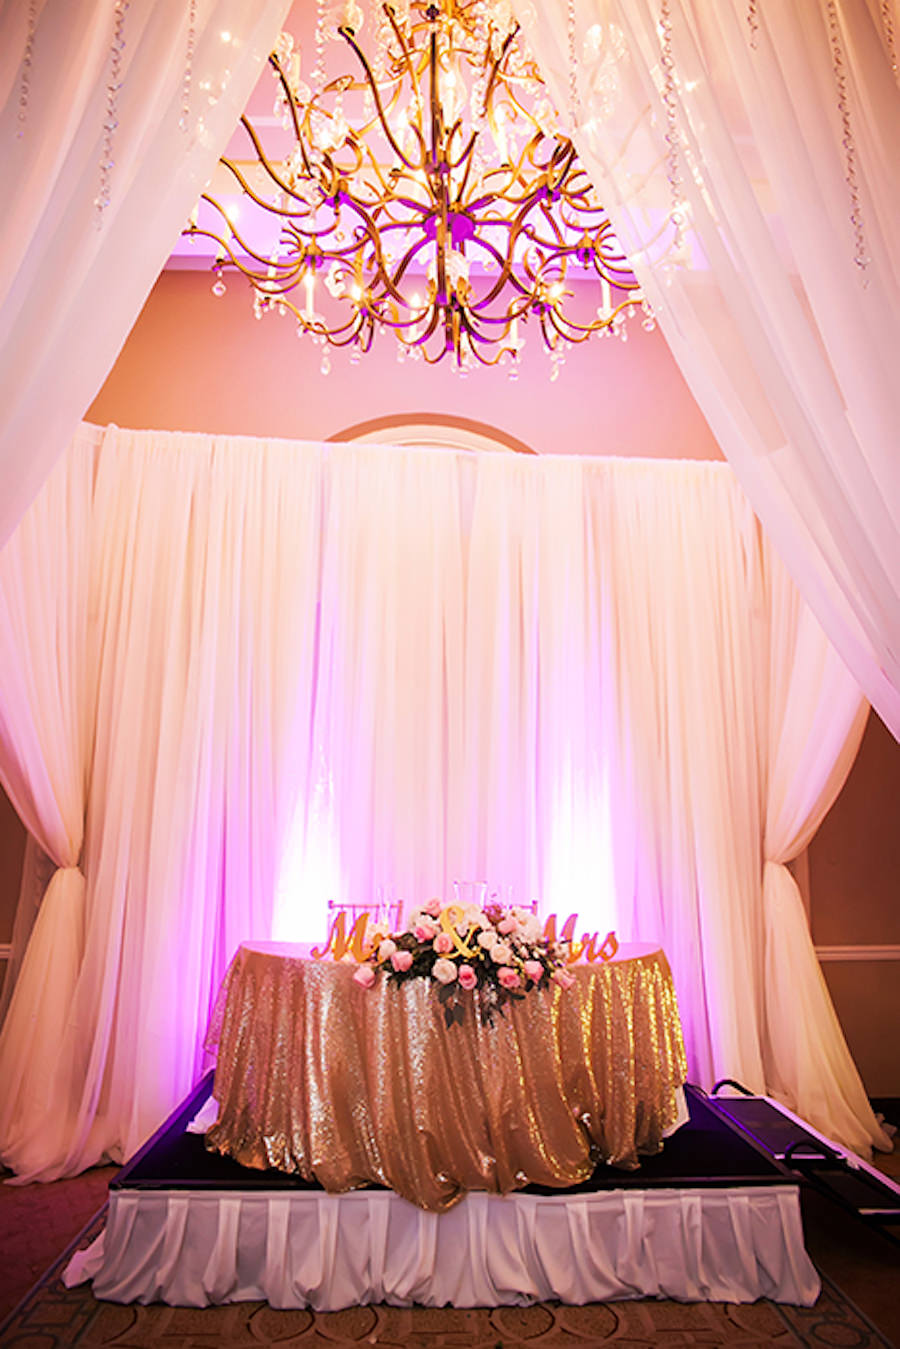 Pink and Gold Wedding Sweetheart Table with Gold Specialty Linen and Light Pink Uplighting at St Pete Wedding Venue The Don Cesar | St Pete Wedding Photographer Limelight Photography